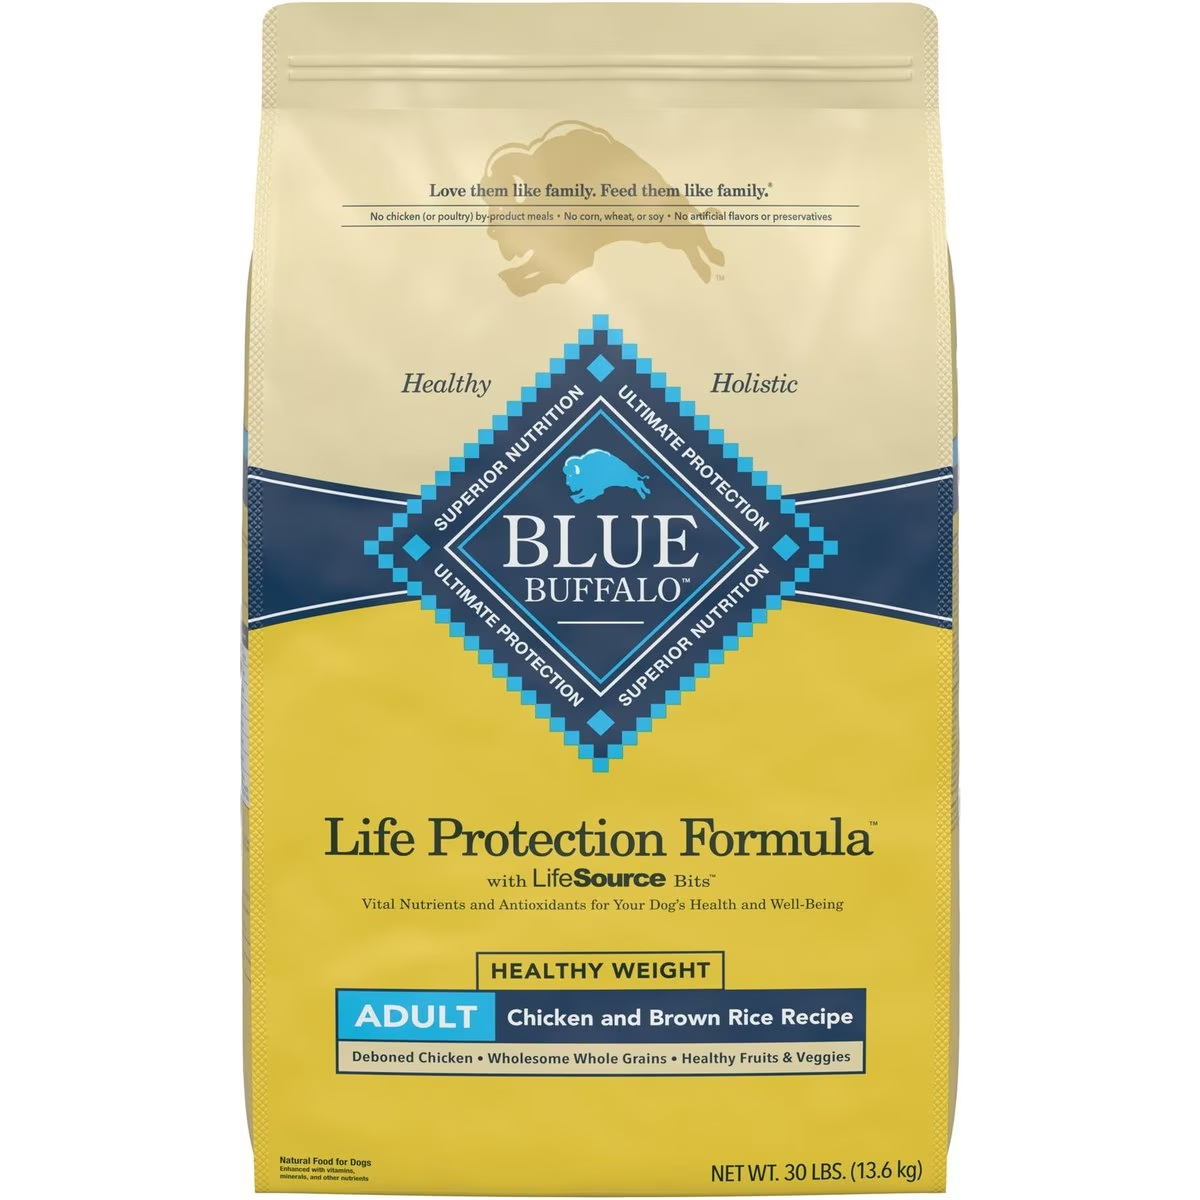 Blue Buffalo Life Protection Formula Healthy Weight Adult Chicken & Brown Rice Recipe Dry Dog Food 